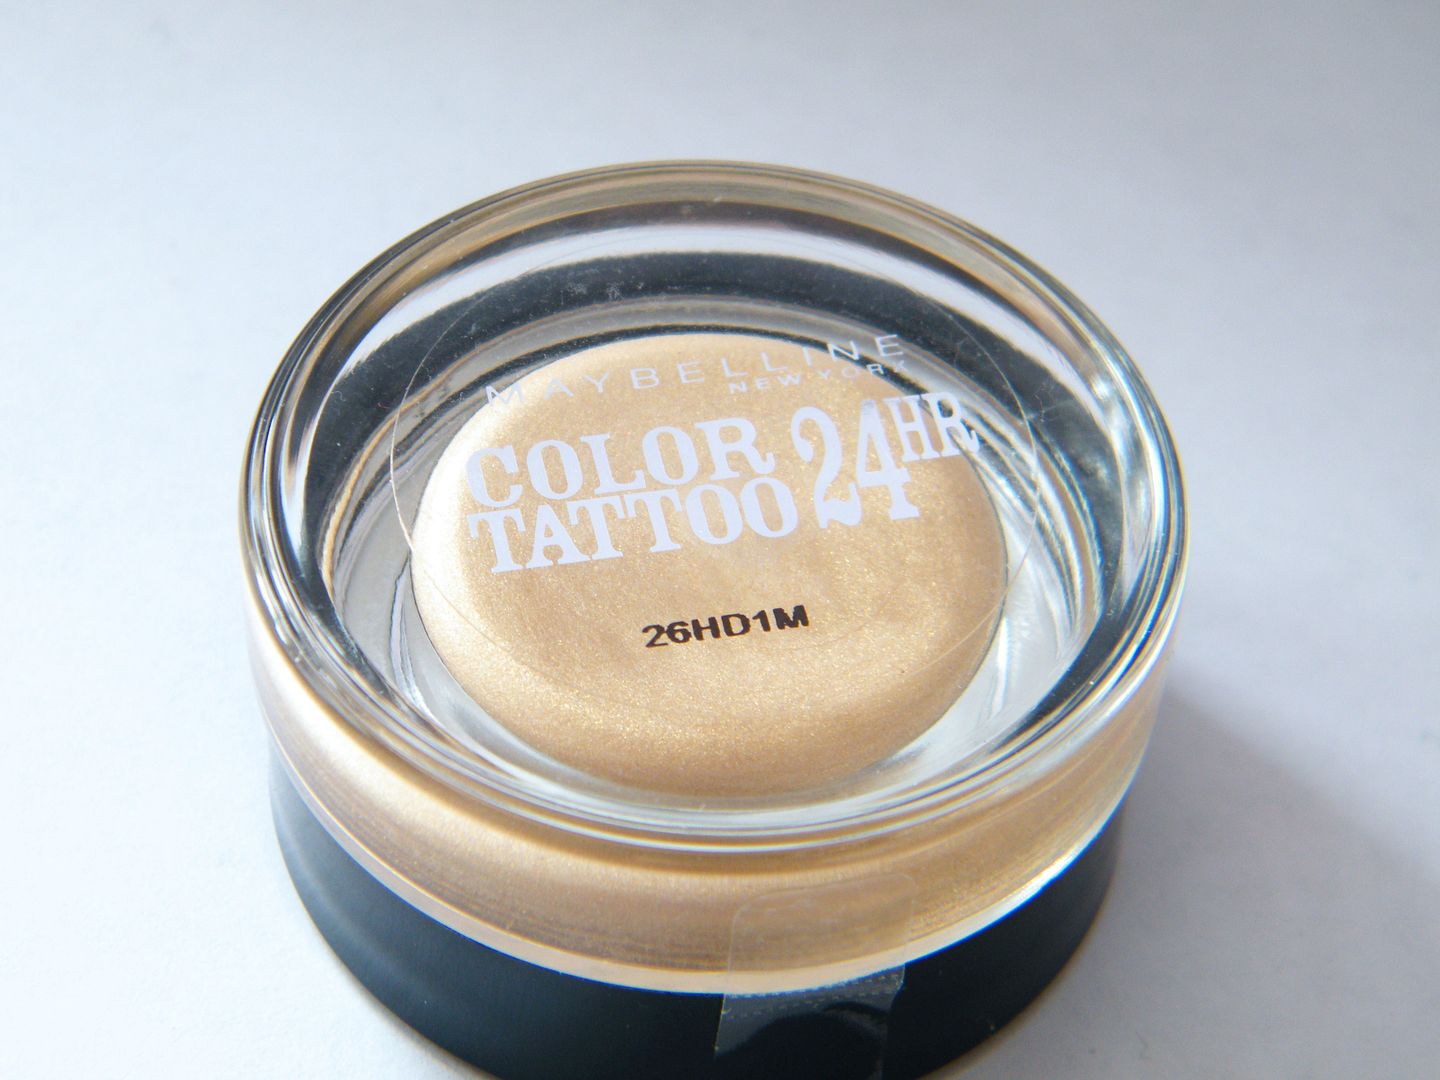 Maybelline Colour Tattoo 24hr